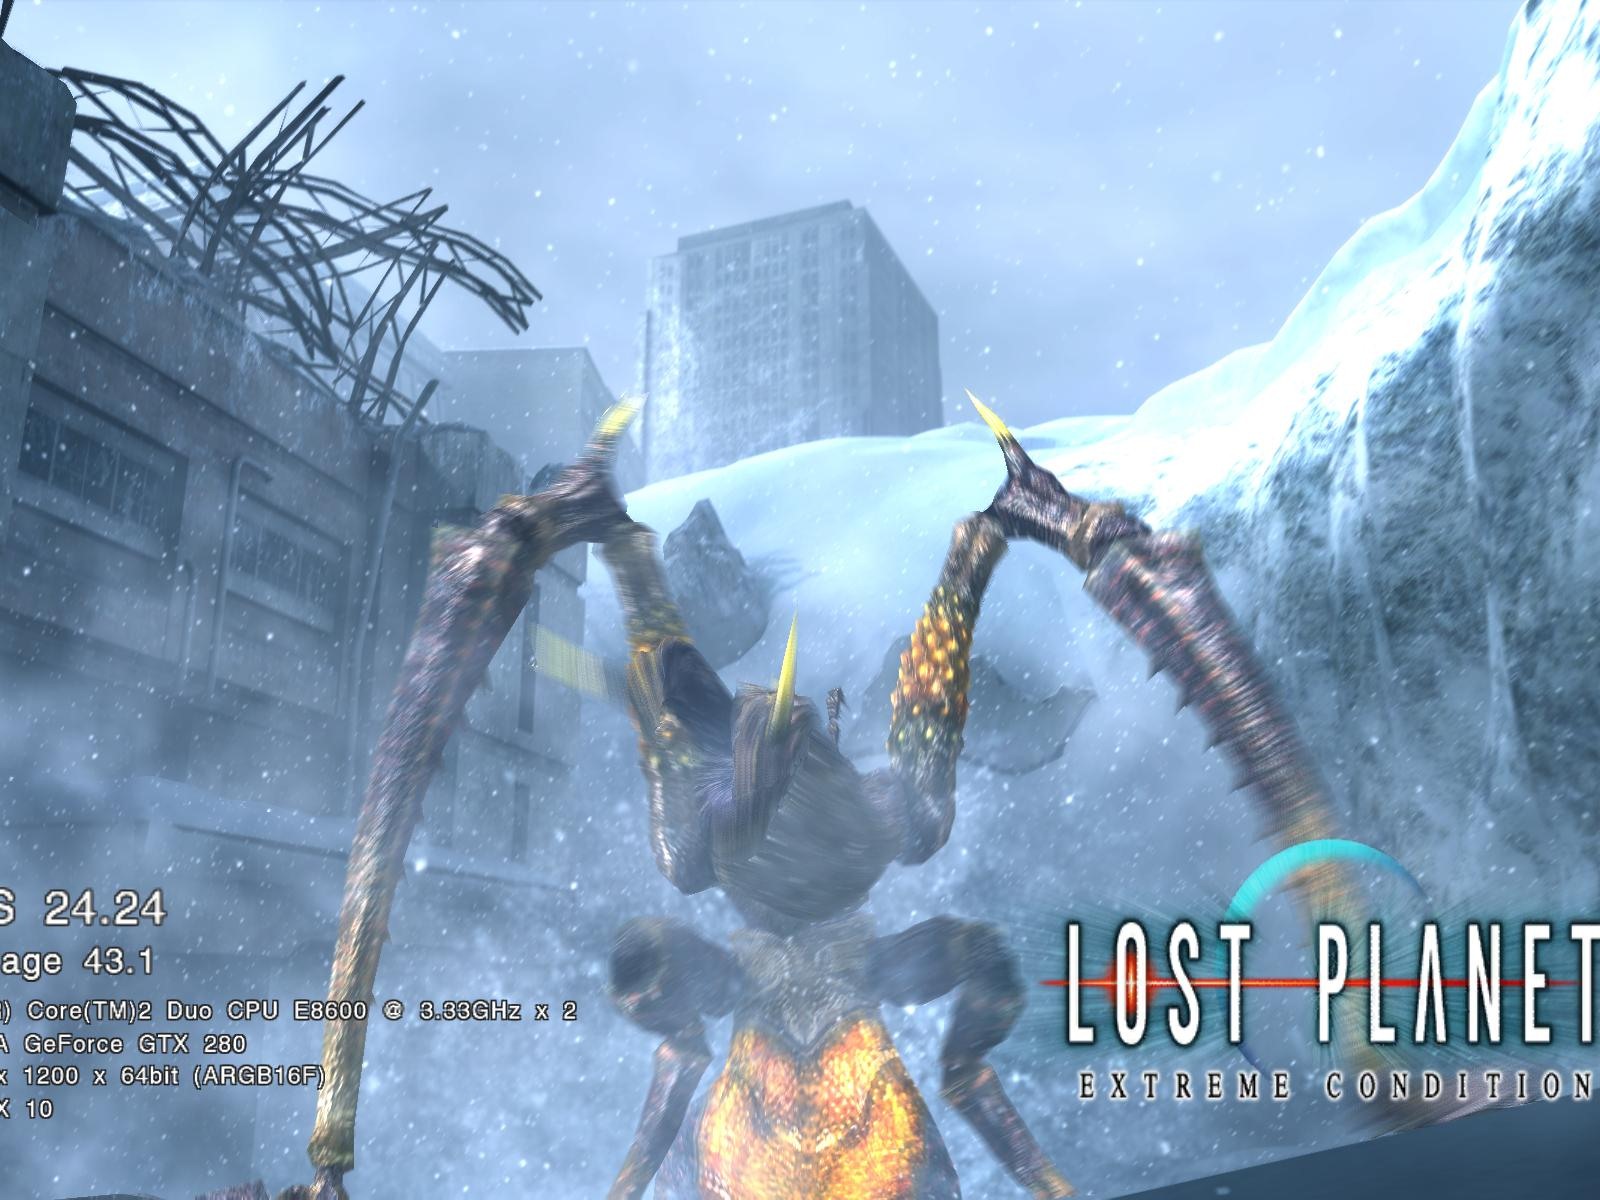 Lost Planet: Extreme Condition HD tapety na plochu #11 - 1600x1200